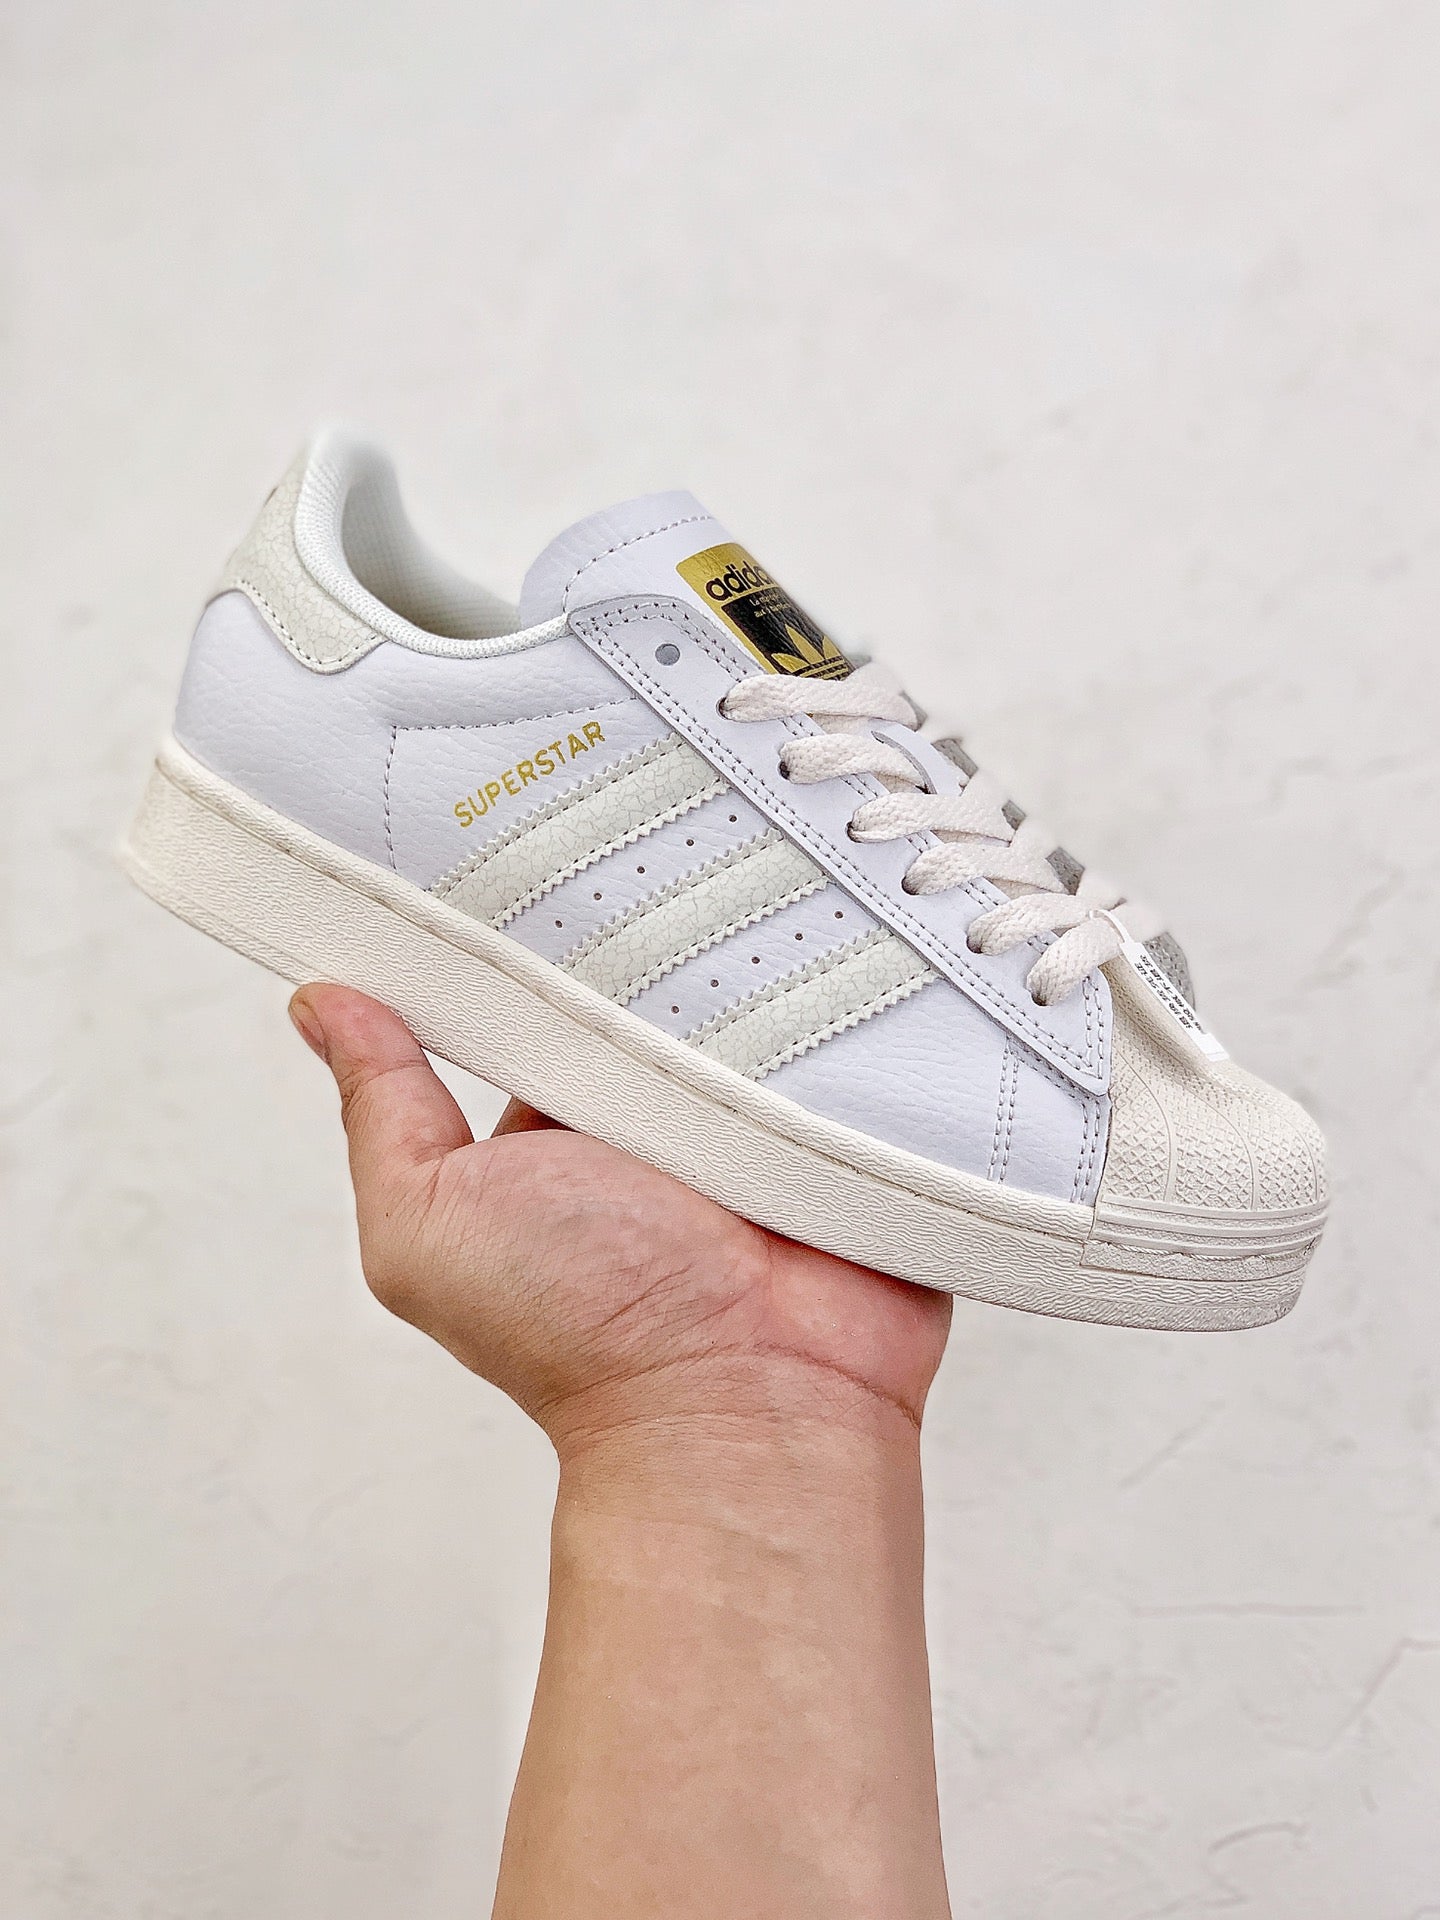 Adidas superstar white and gold